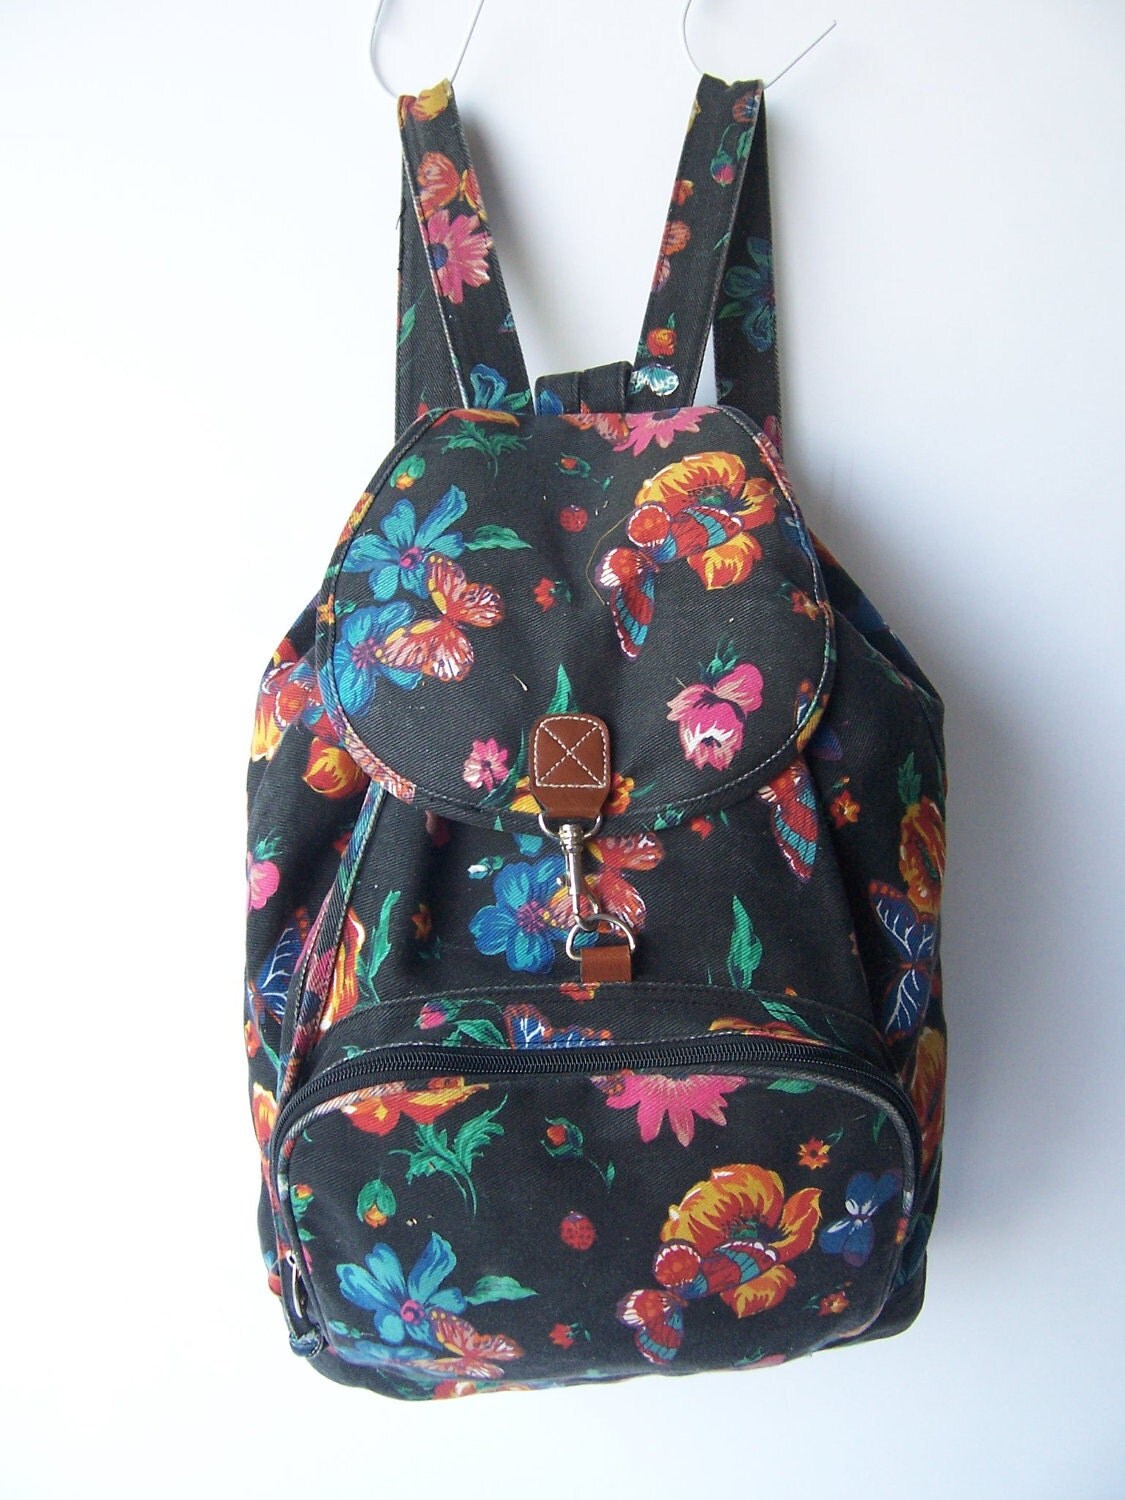 Vintage FLORAL Bucket Backpack by MonkiesVintage on Etsy